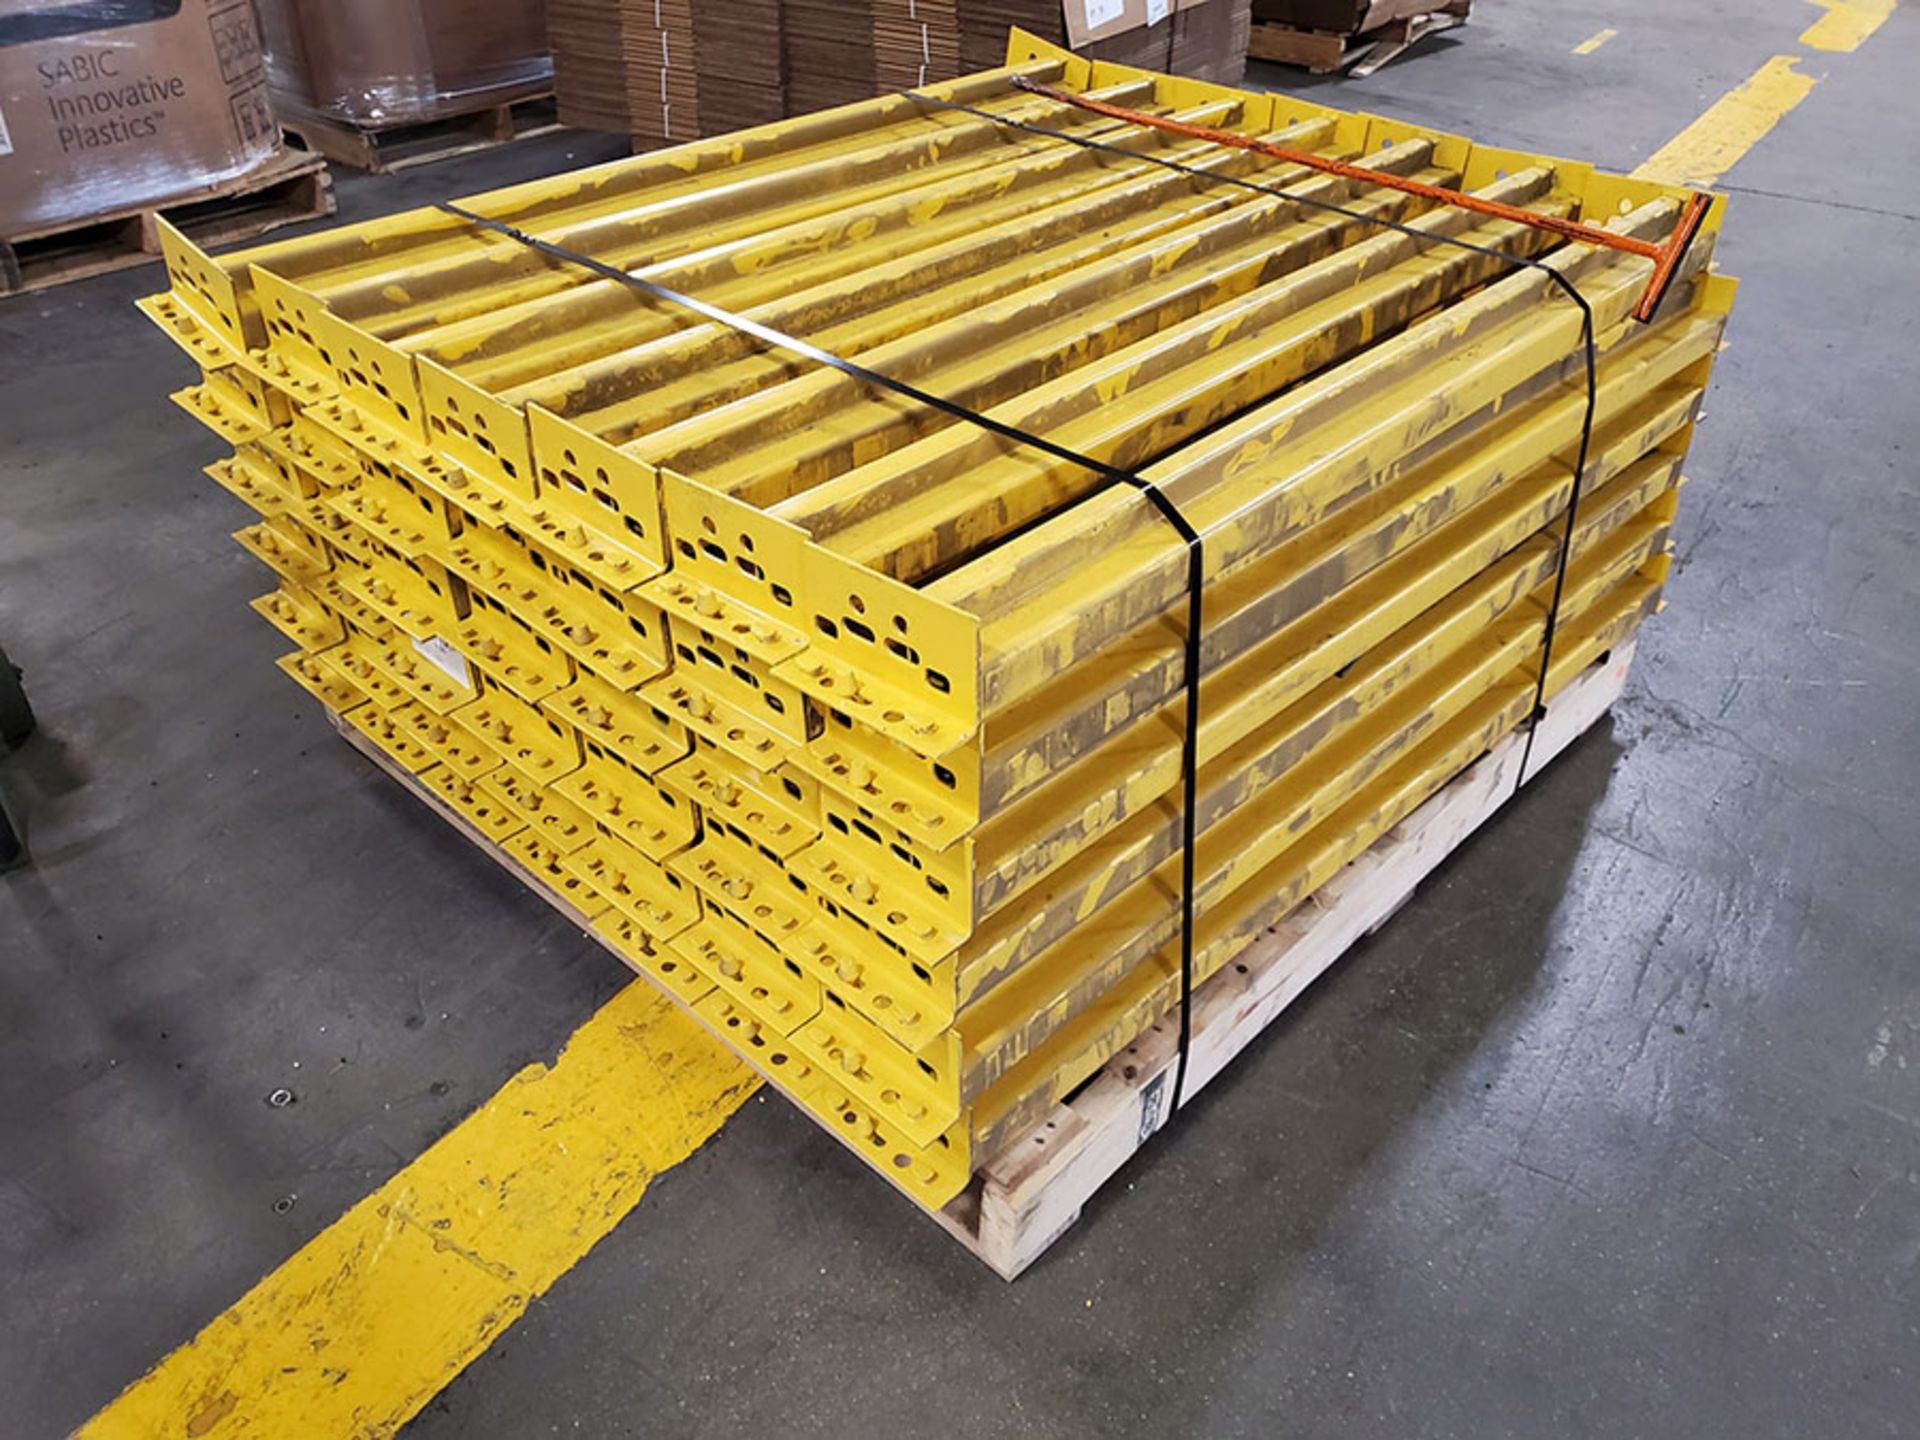 PALLET RACKING ASSEMBLED & ON THE GROUND - (14) SECTIONS TEAR DROP PALLET RACKING, 12' UPRIGHTS X - Image 10 of 19